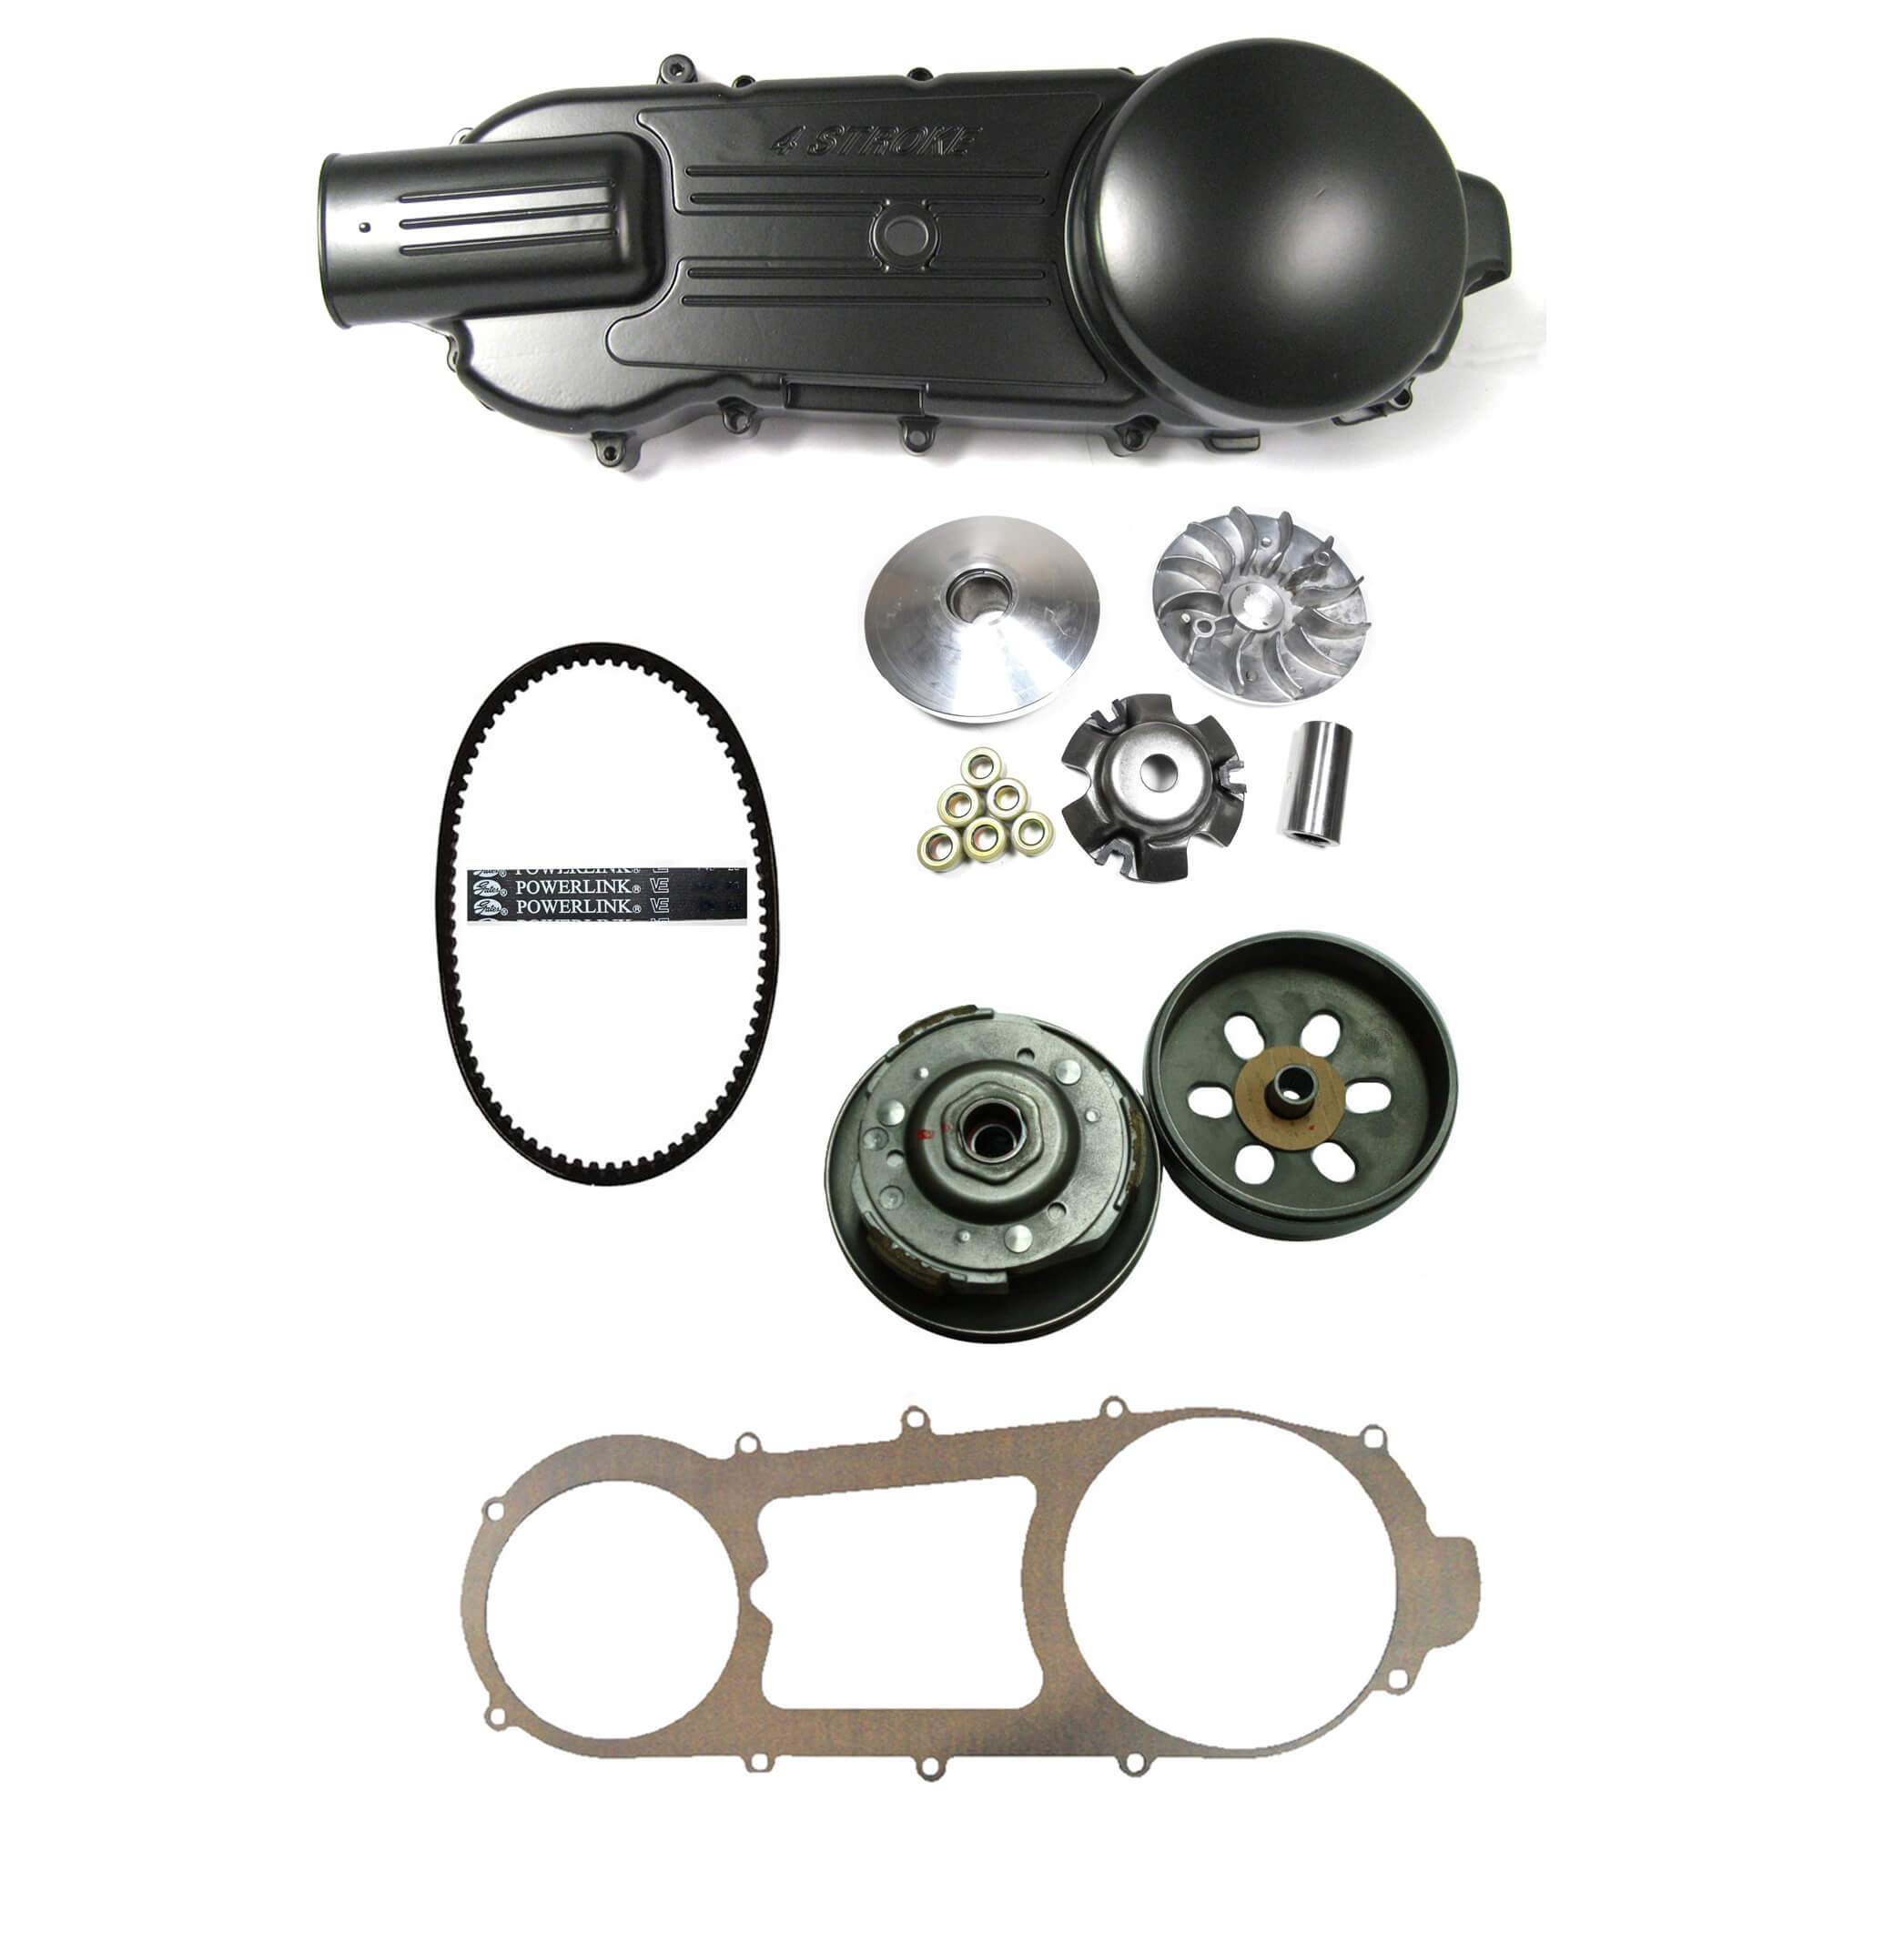 GY6-150 (150cc) Long Case Crankcase Cover, Clutch & Belt Kit Includes: LH Crankcase Cover (Black), Front Clutch Variator, Rear Clutch Pulley, Powerlink Drive Belt & Belt Cover Gasket For Units With The 842x20x30 Belt